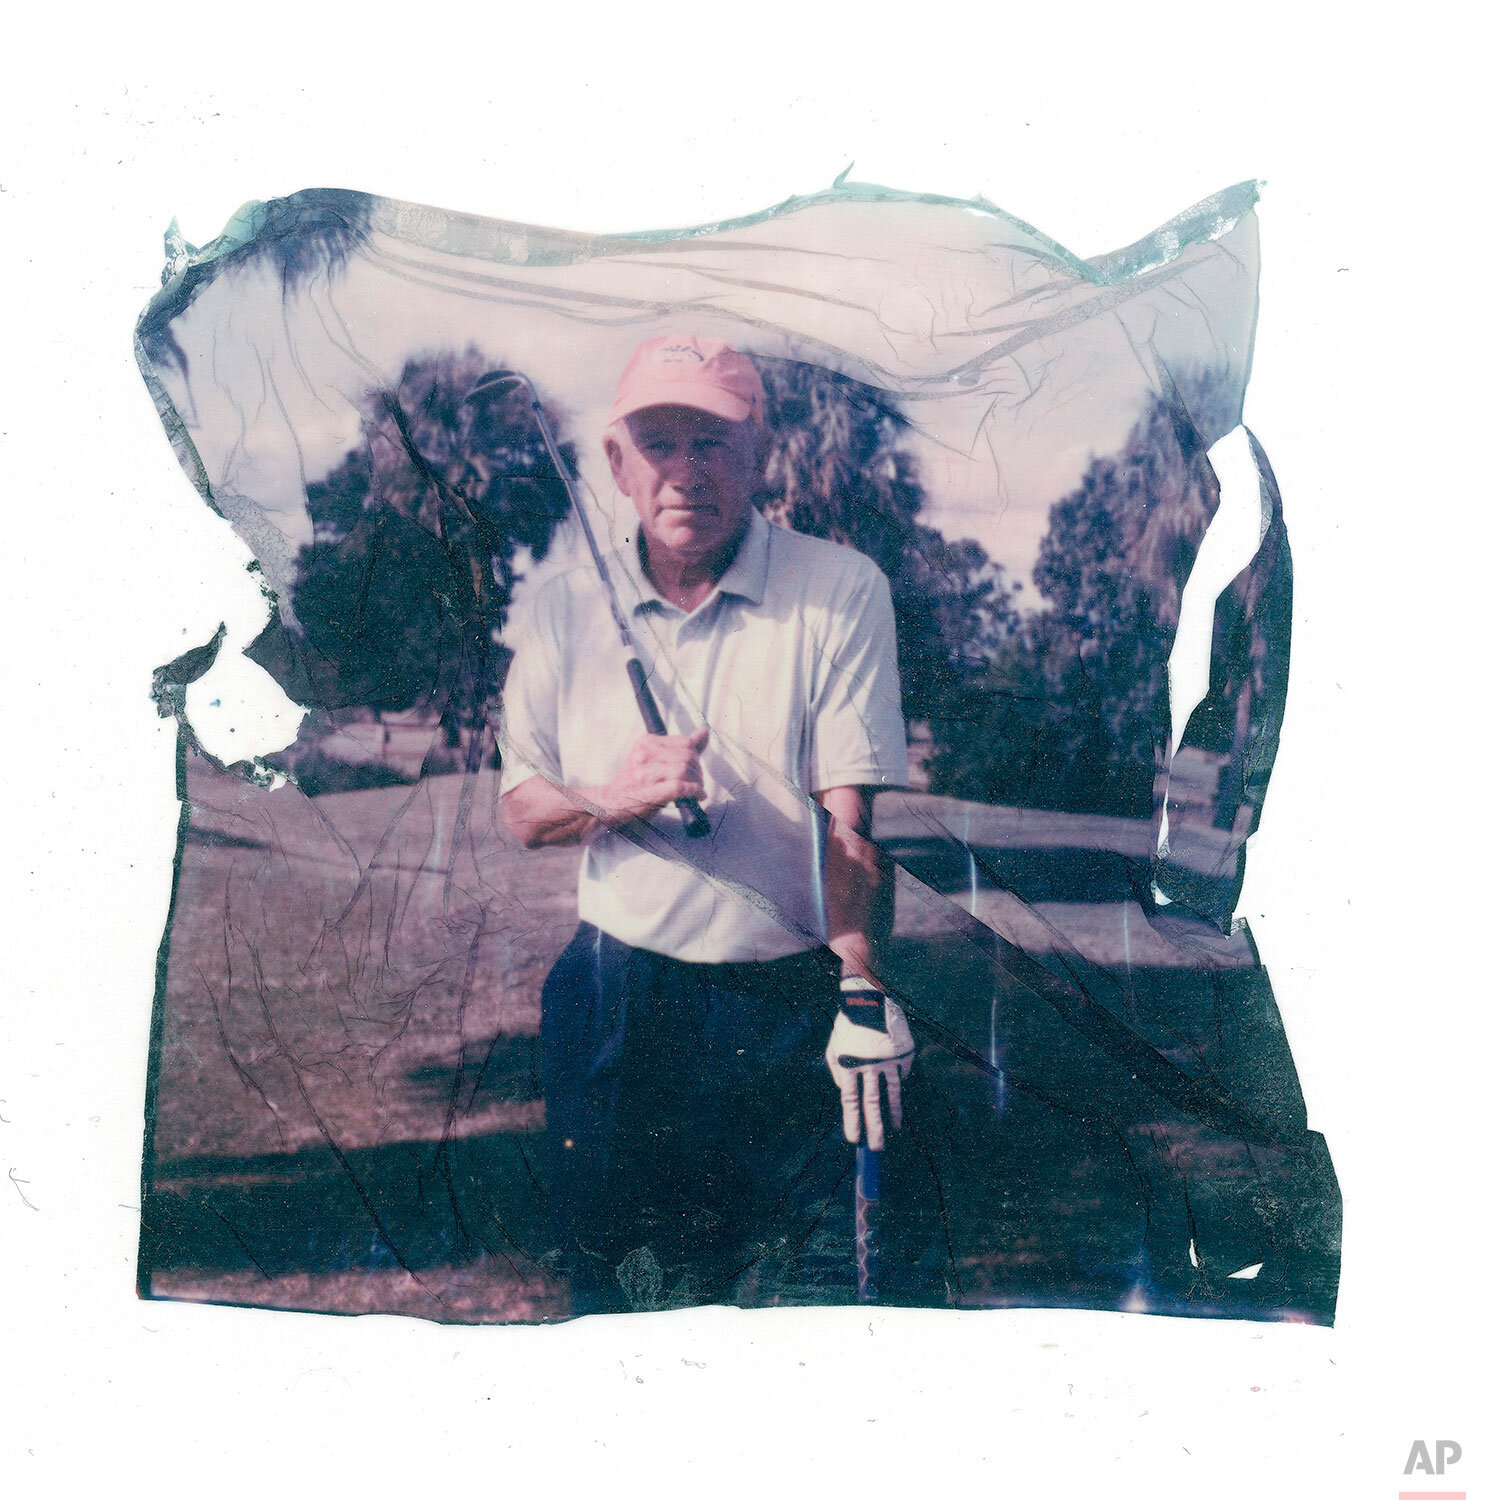  In this image made from a Polaroid emulsion transfer, John Vai, 67, a survivor of clergy abuse poses for a photo on the golf course in The Villages, Fl., Friday, Nov. 22, 2019. He plays golf each day, part of a routine that helps keep dark memories 